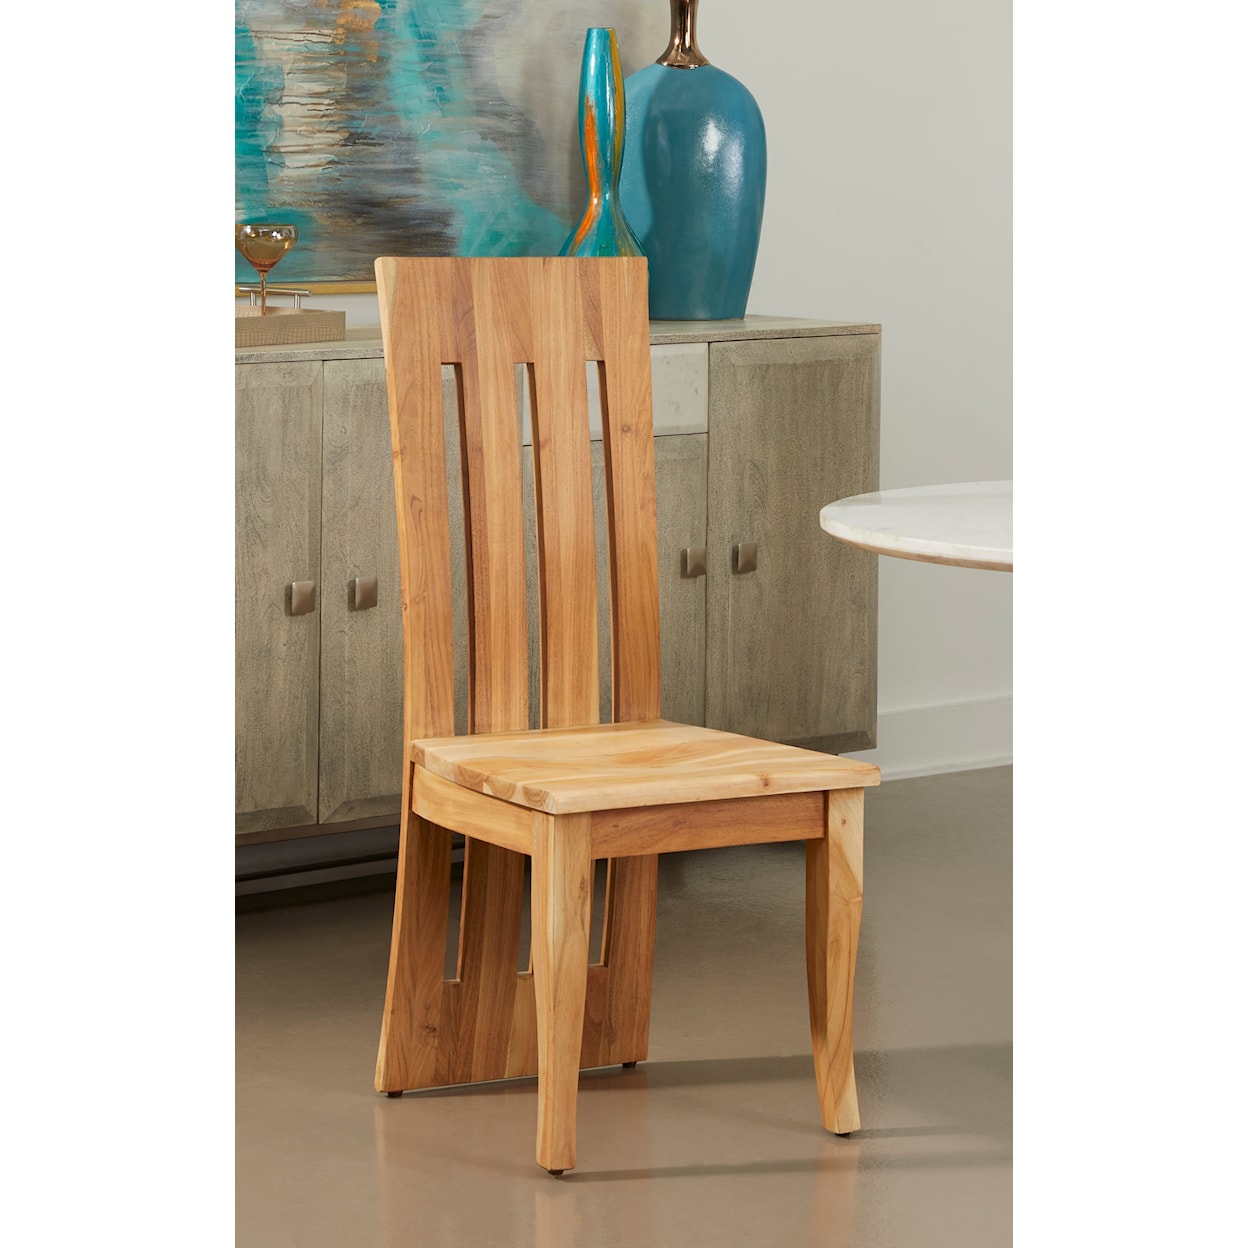 C2C Yorkshire Dining Chair